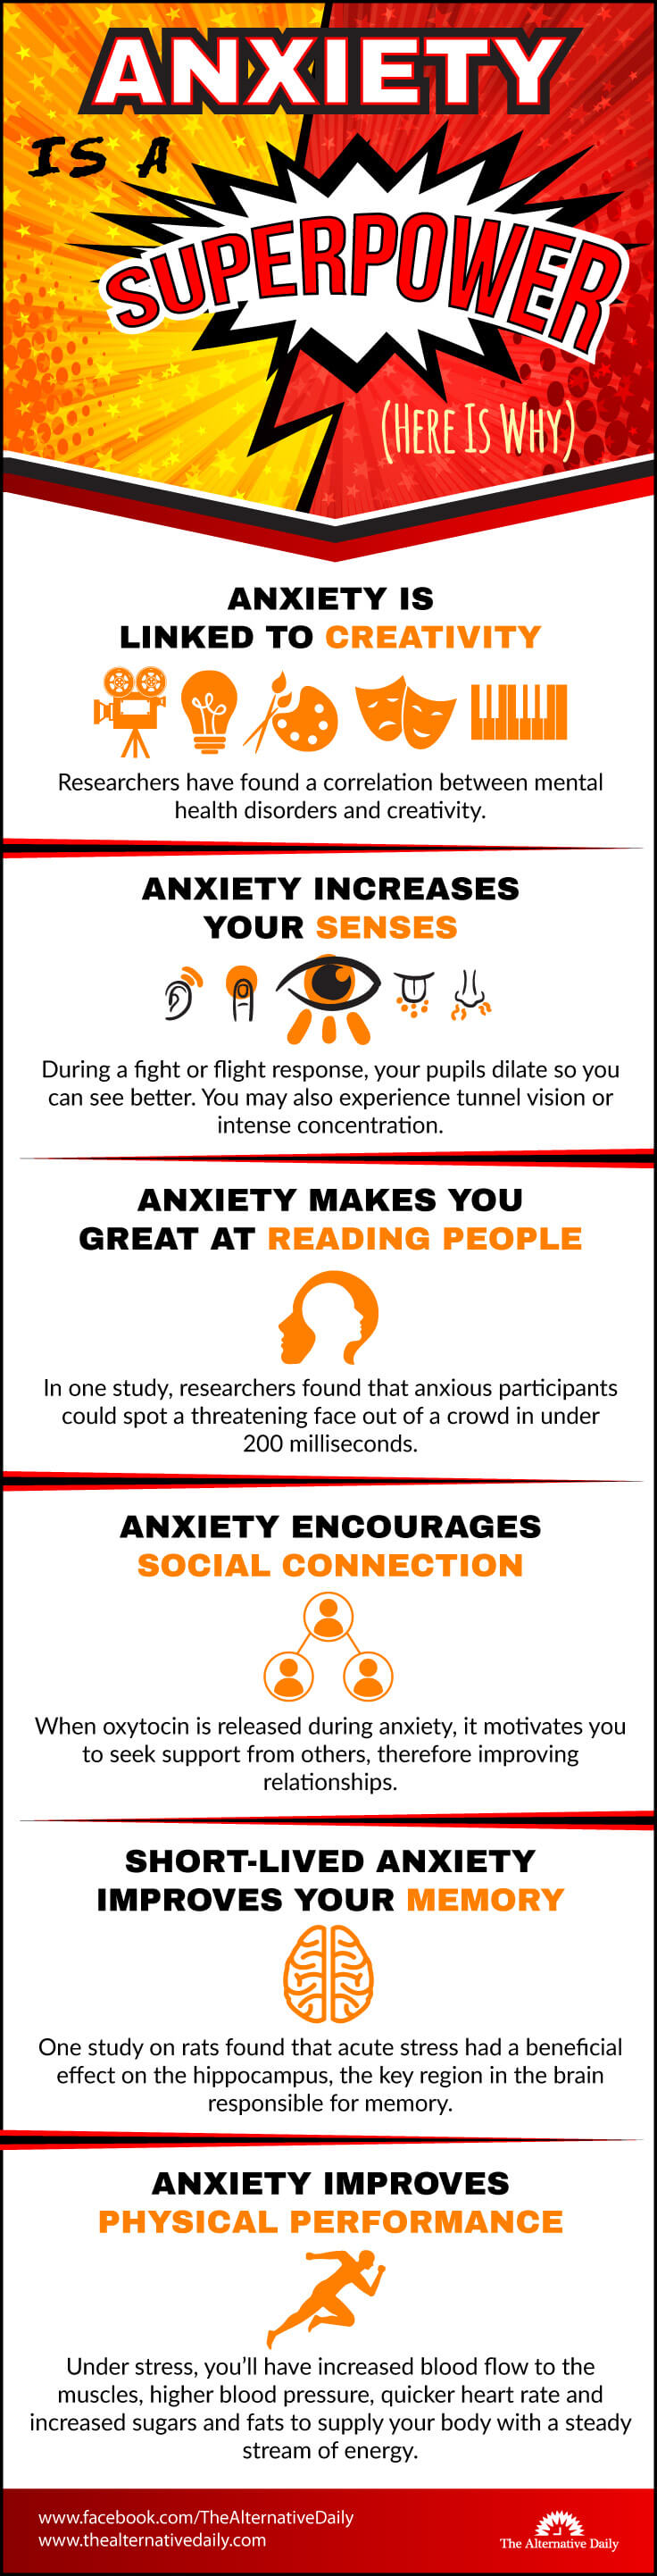 Anxiety Is A Superpower (Here Is Why)